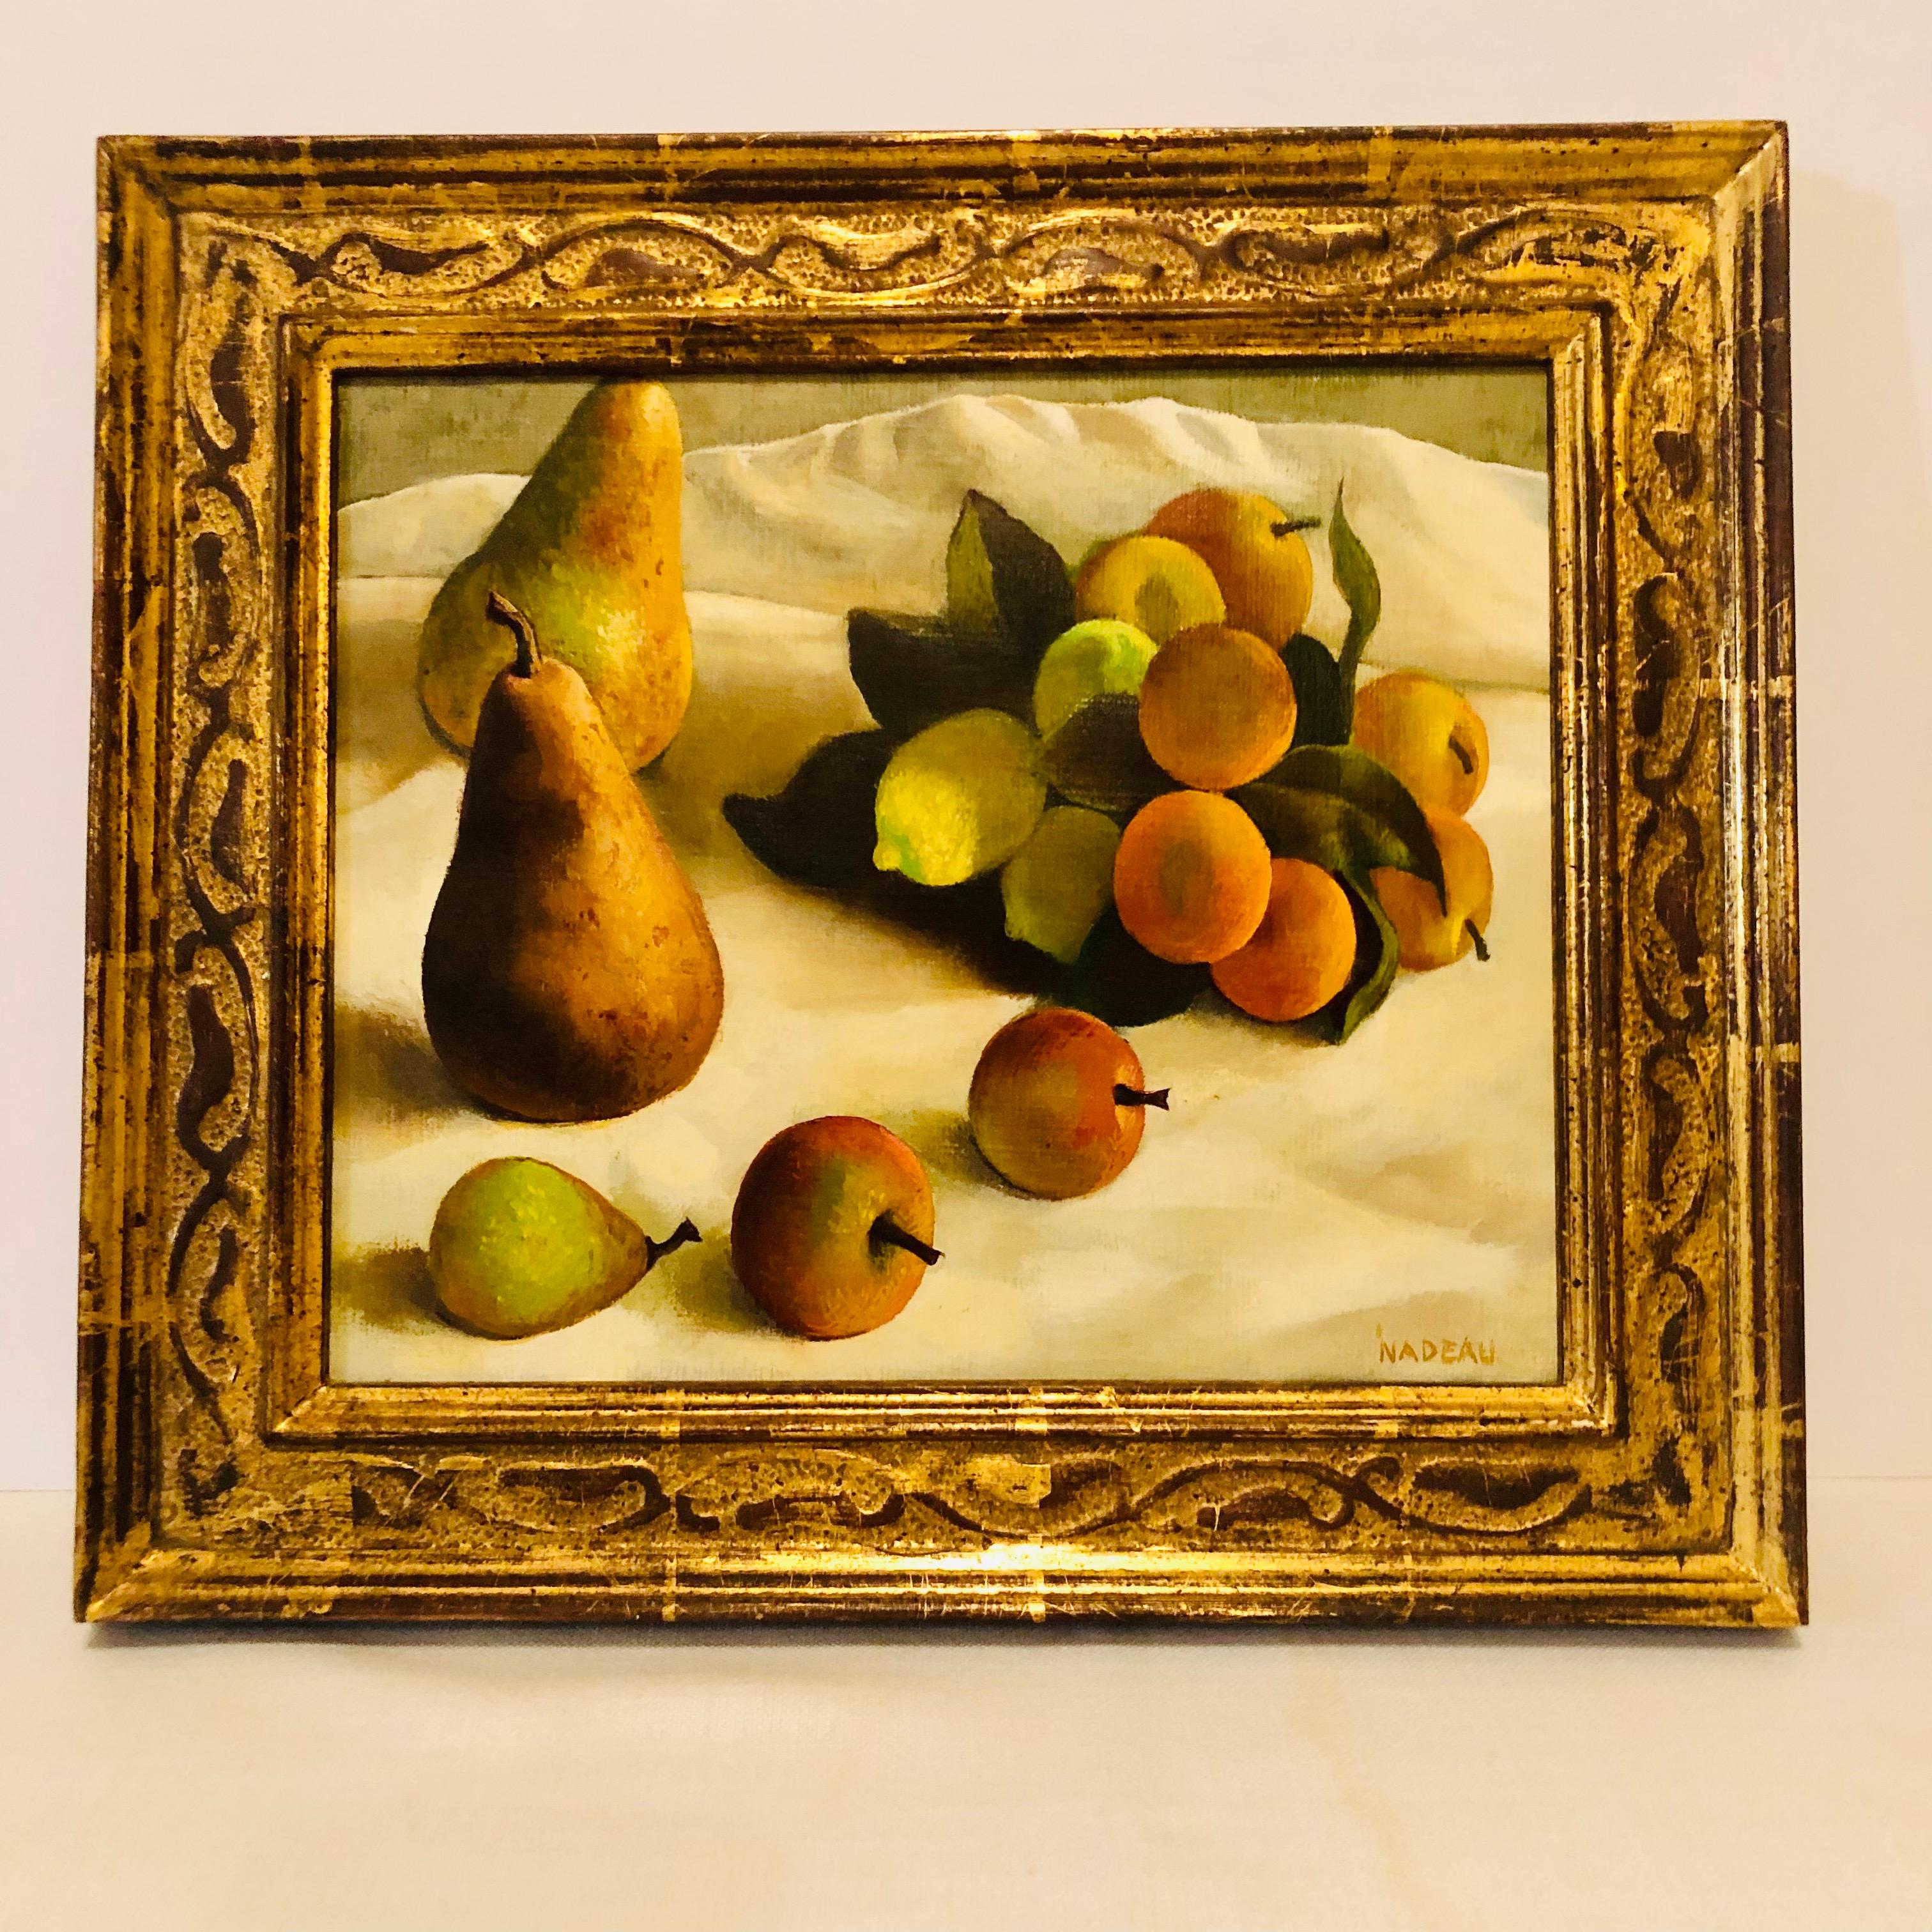 This is a stunning oil on canvas painting of pears and other fruits artist signed Nadeau. On the back of the painting, there is a card attached that says the painter is Thomas Nadeau, even though it was signed Nadeau on the painting. Thomas Nadeau